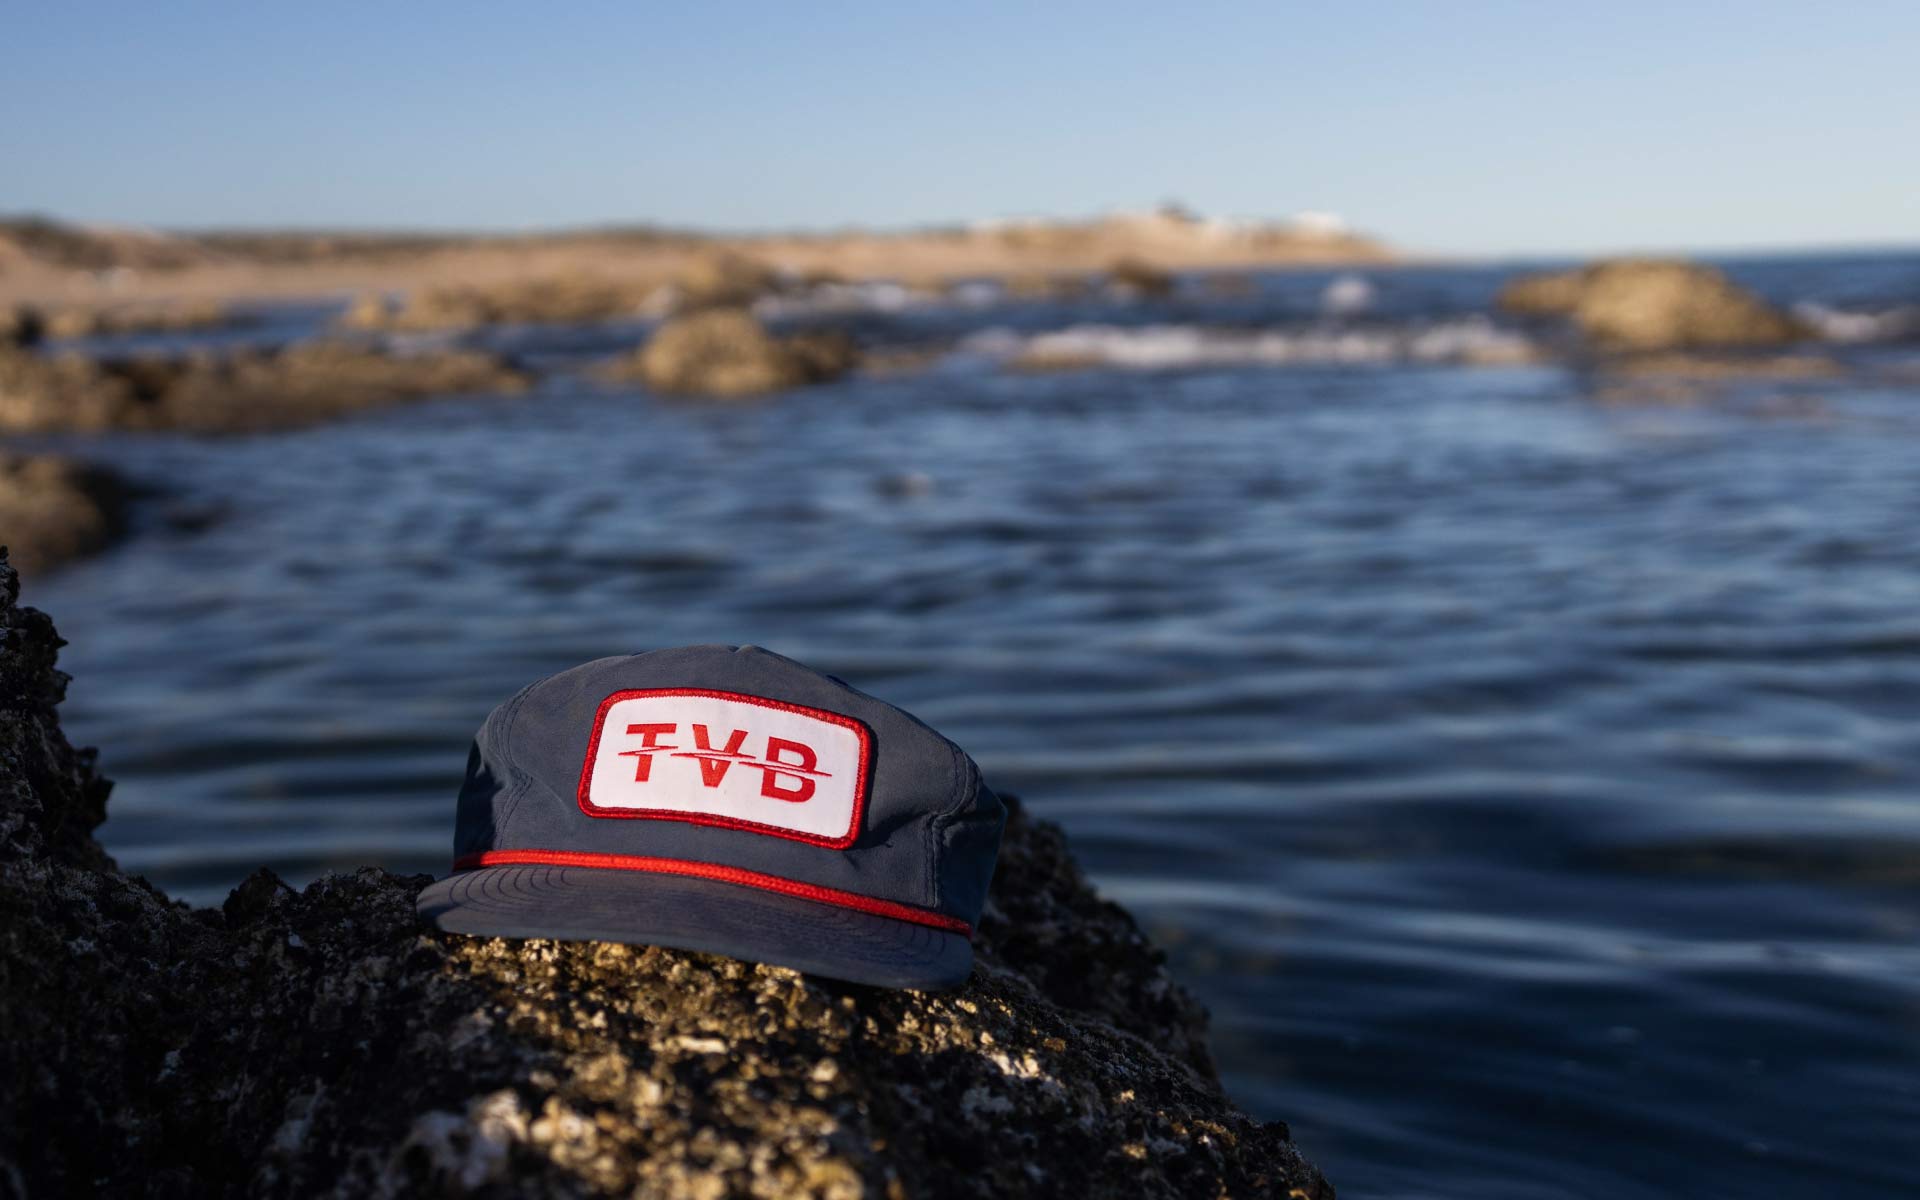 TVB hat on a rock by the ocean